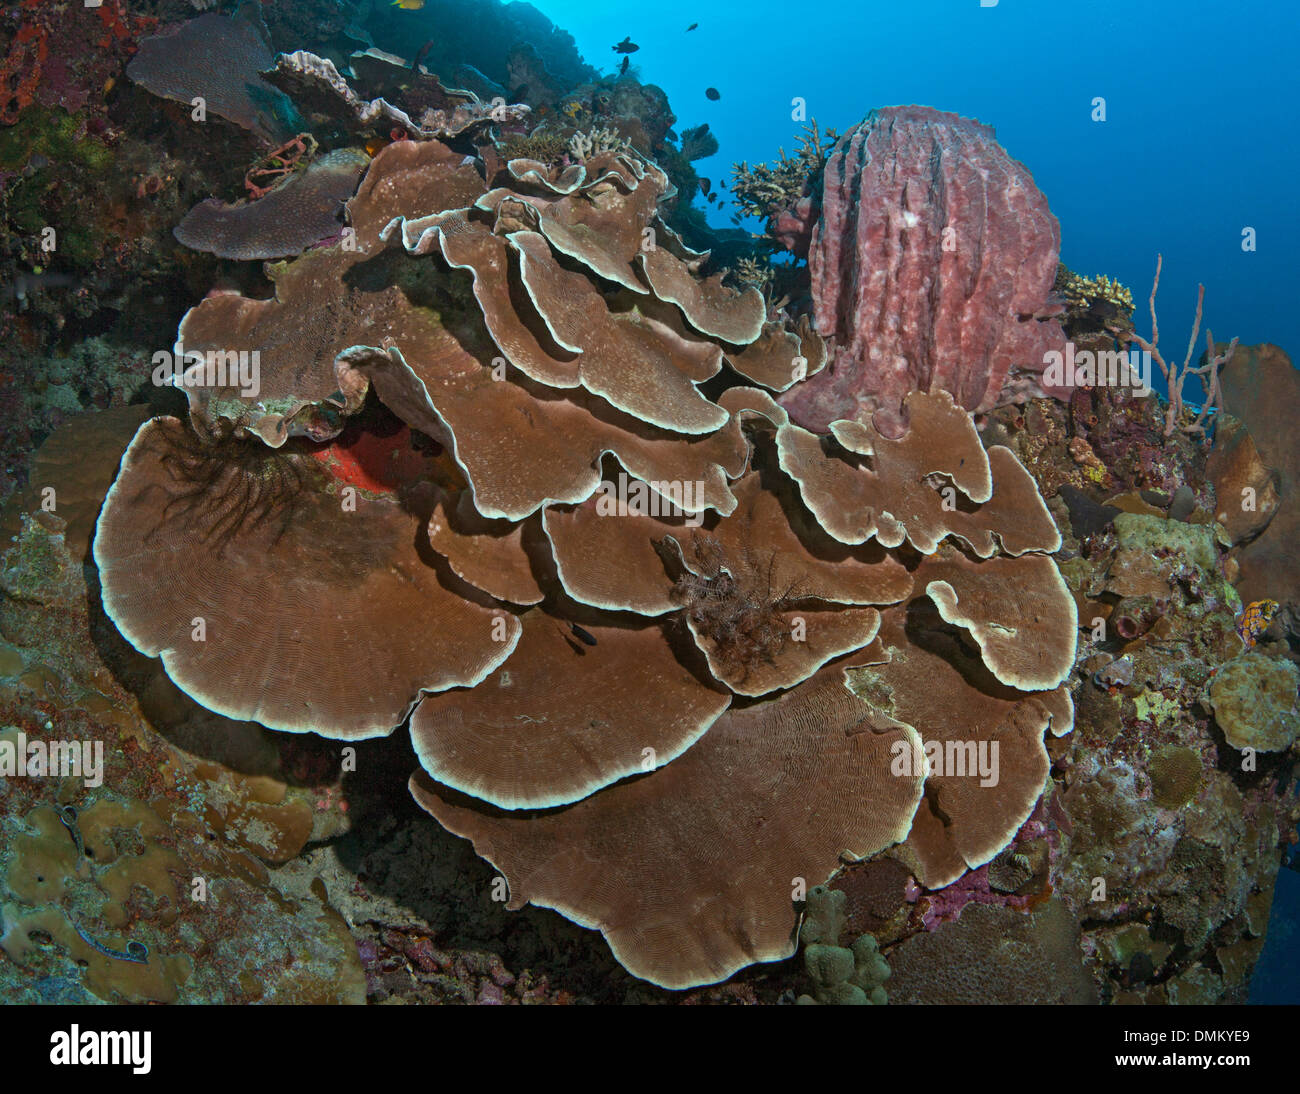 Leaf plate coral colony with red barrel sponge. Stock Photo